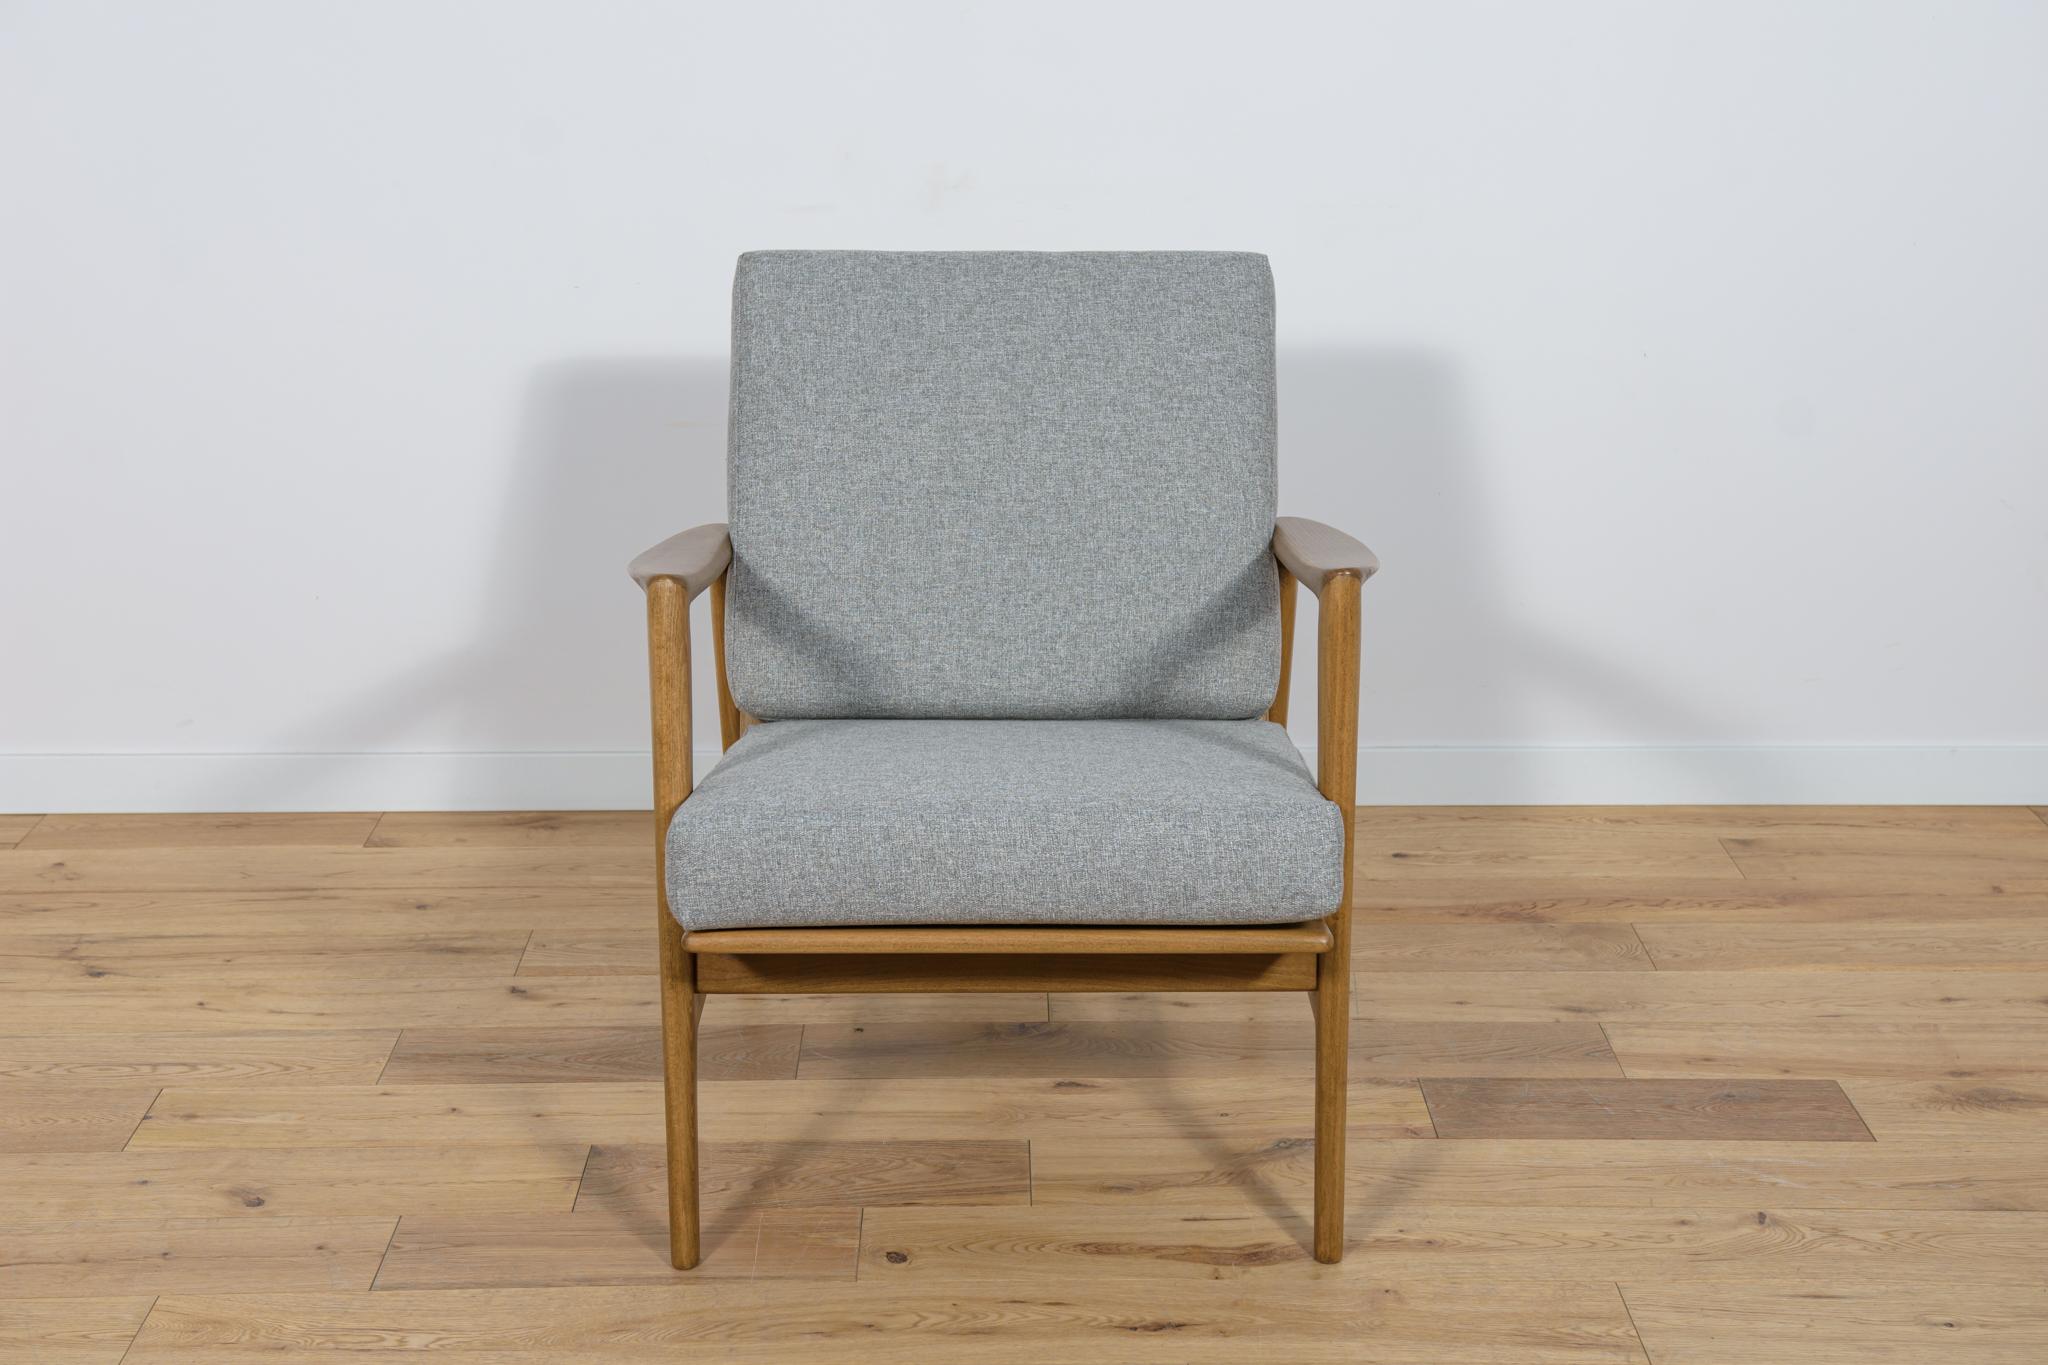 The armchair was produced by the Polish company Swarzędzka Furniture Factory in 60 s. The armchair have new cushions,  reupholstered in a quality dark grey fabric. The beech frame has been cleaned from the old surface, painted with a walnut colored